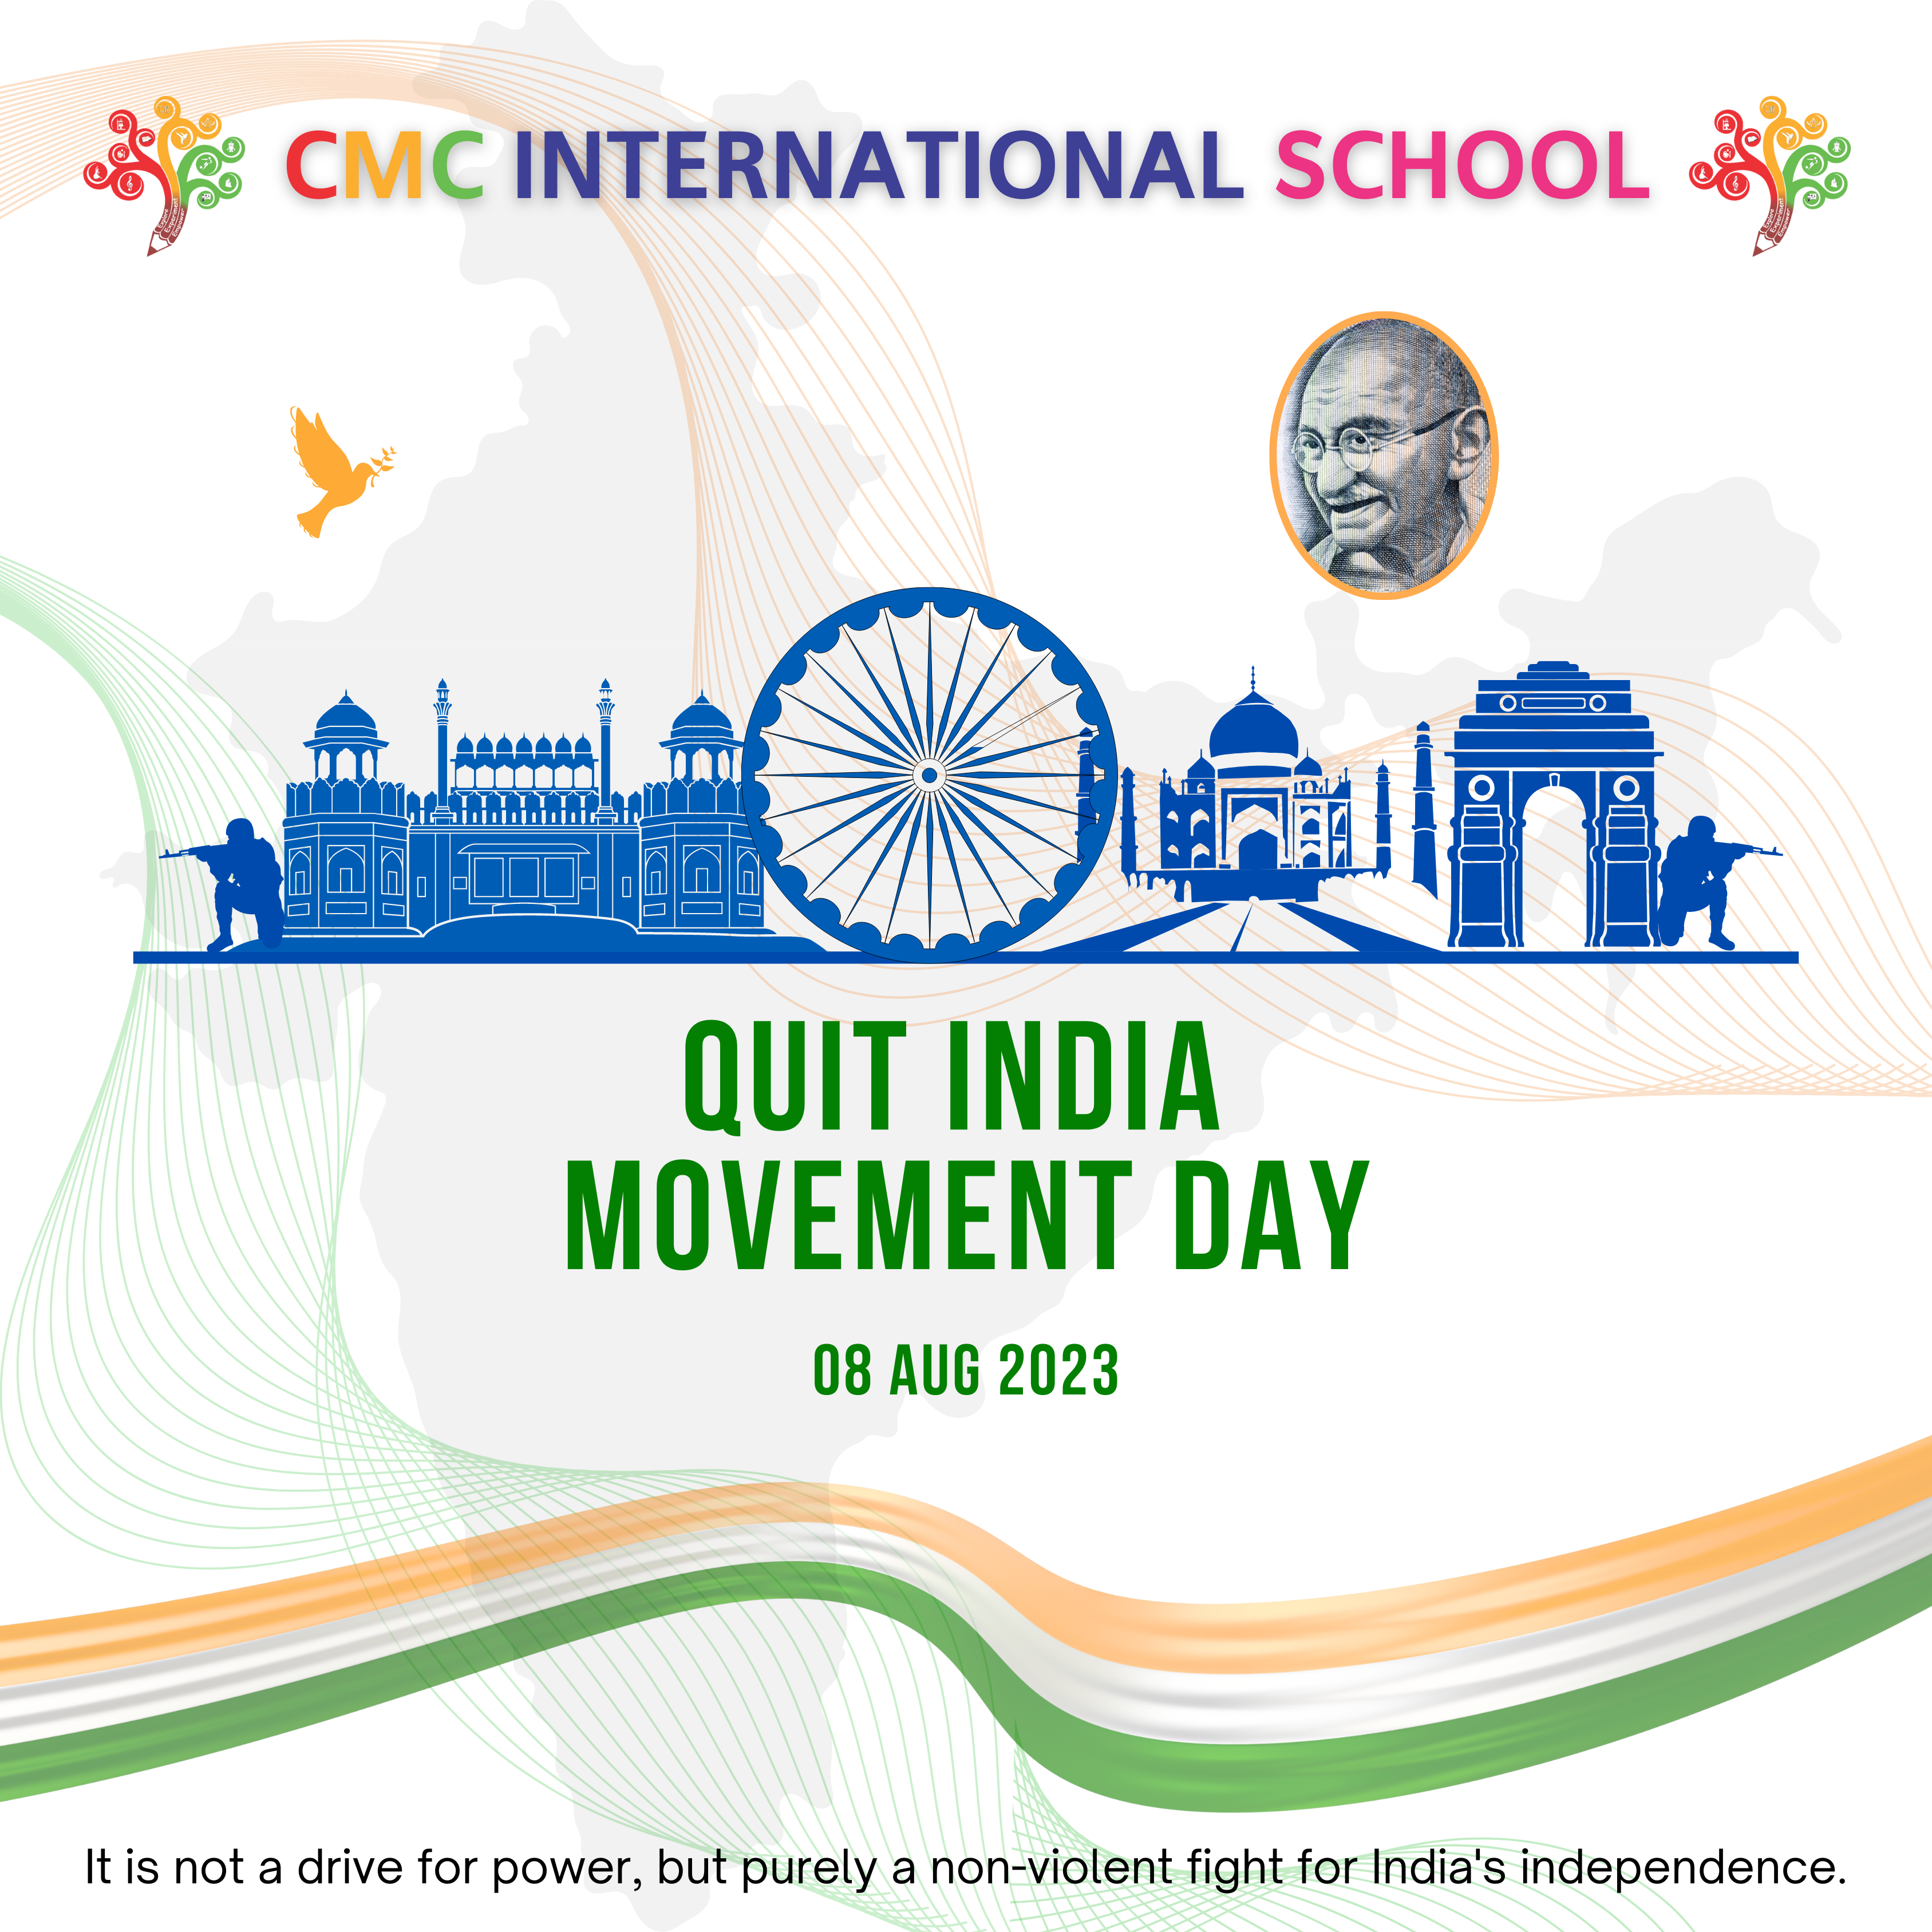 20230814104138_08_AUG_QUIT_INDIA_MOVEMENT_DAY.png